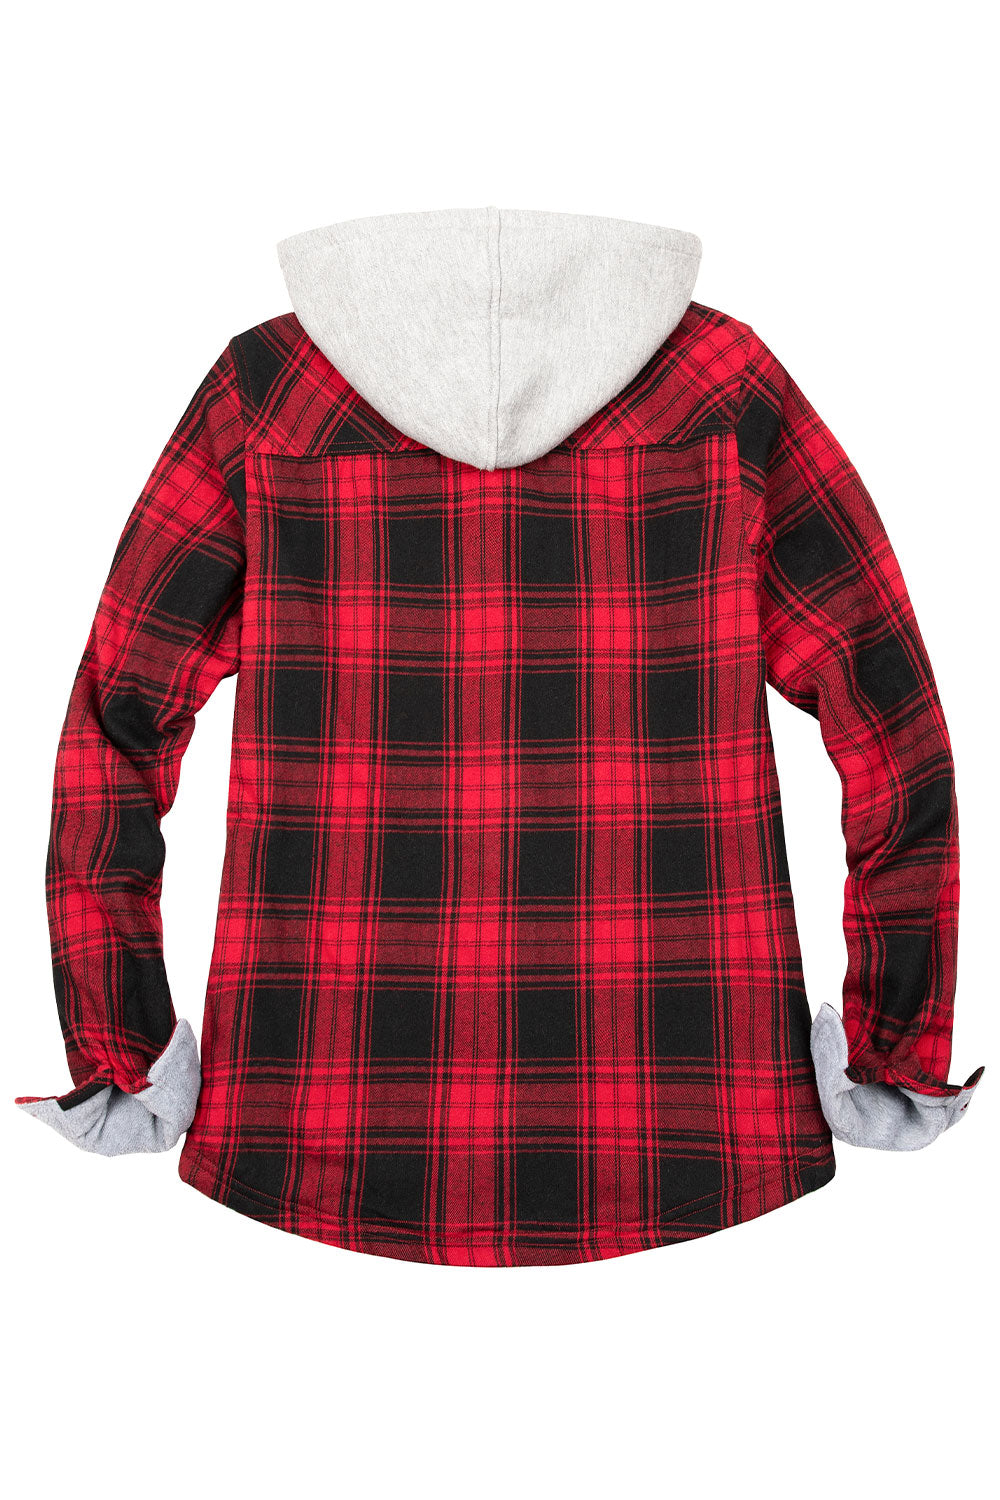 Matching Family Outfits - Women's Red Fleece Lined Flannel Shirt ...